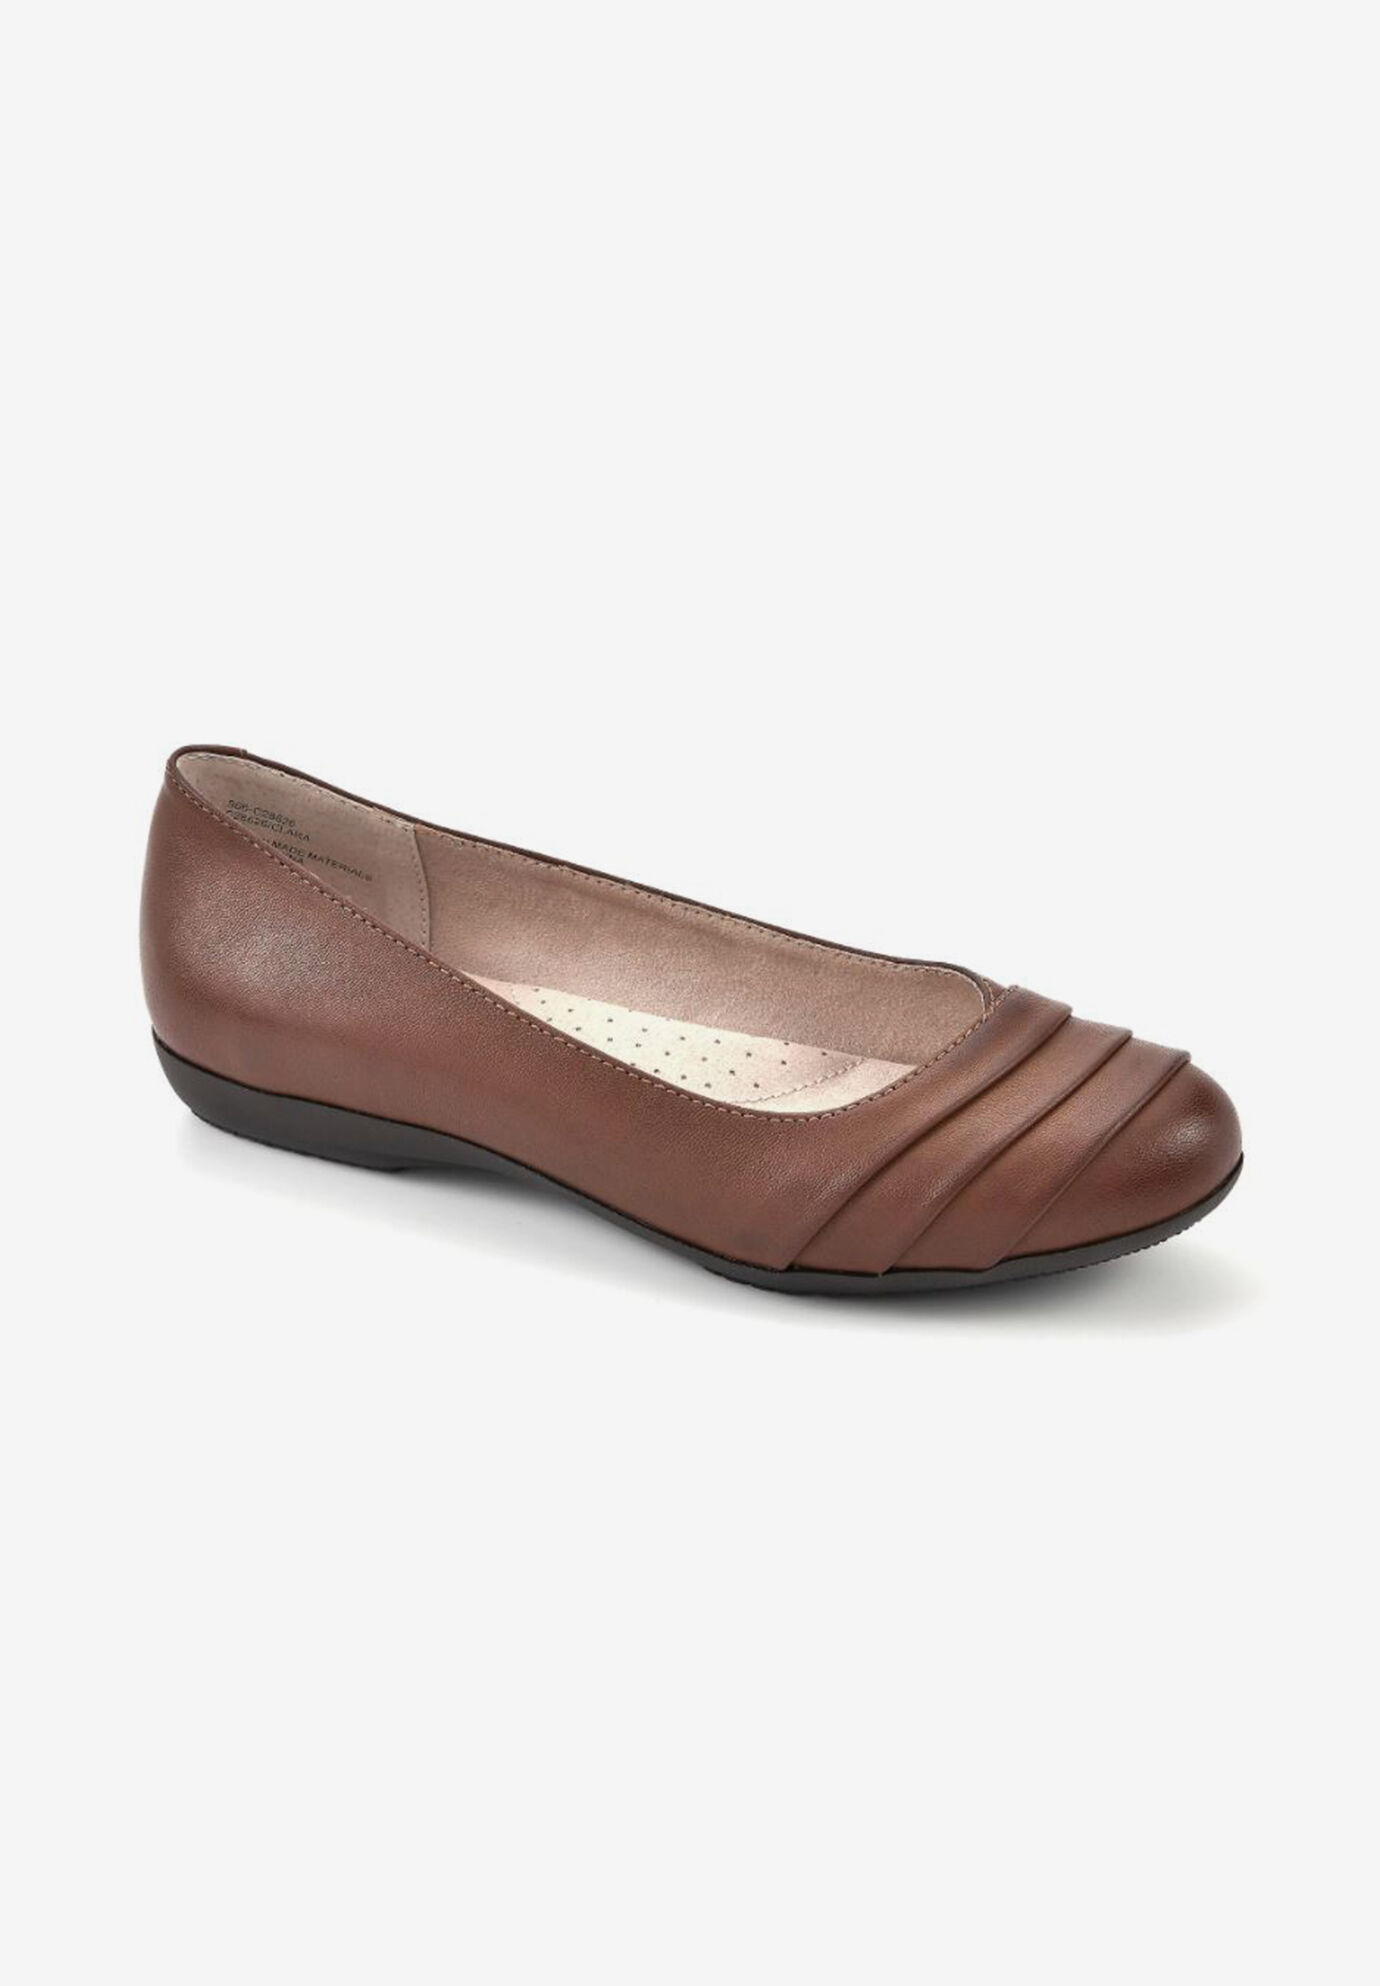 Wide Width Women's Clara Flat by Cliffs in Cognac Burnished Smooth (Size 6 W)